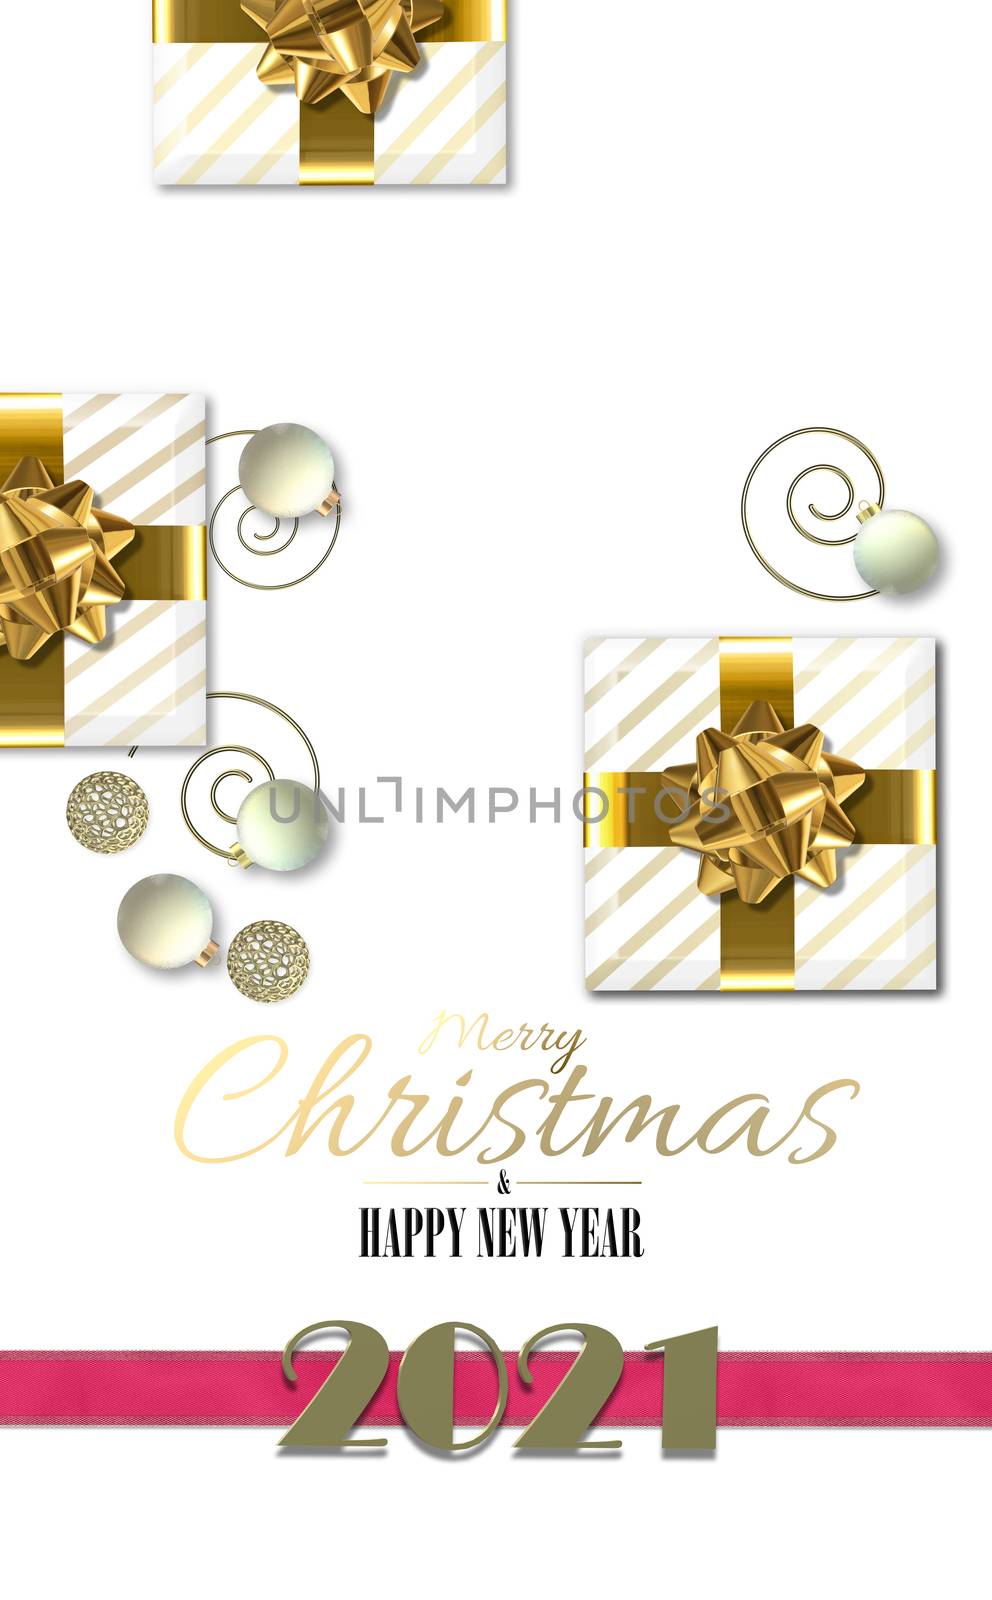 Elegant Christmas holiday card. 3D realistic Xmas gift boxes with golden bow, Xmas ball bauble on white background. Gold digit 2021 on pink ribbon. Text Merry Christmas Happy New Year. 3D illustration